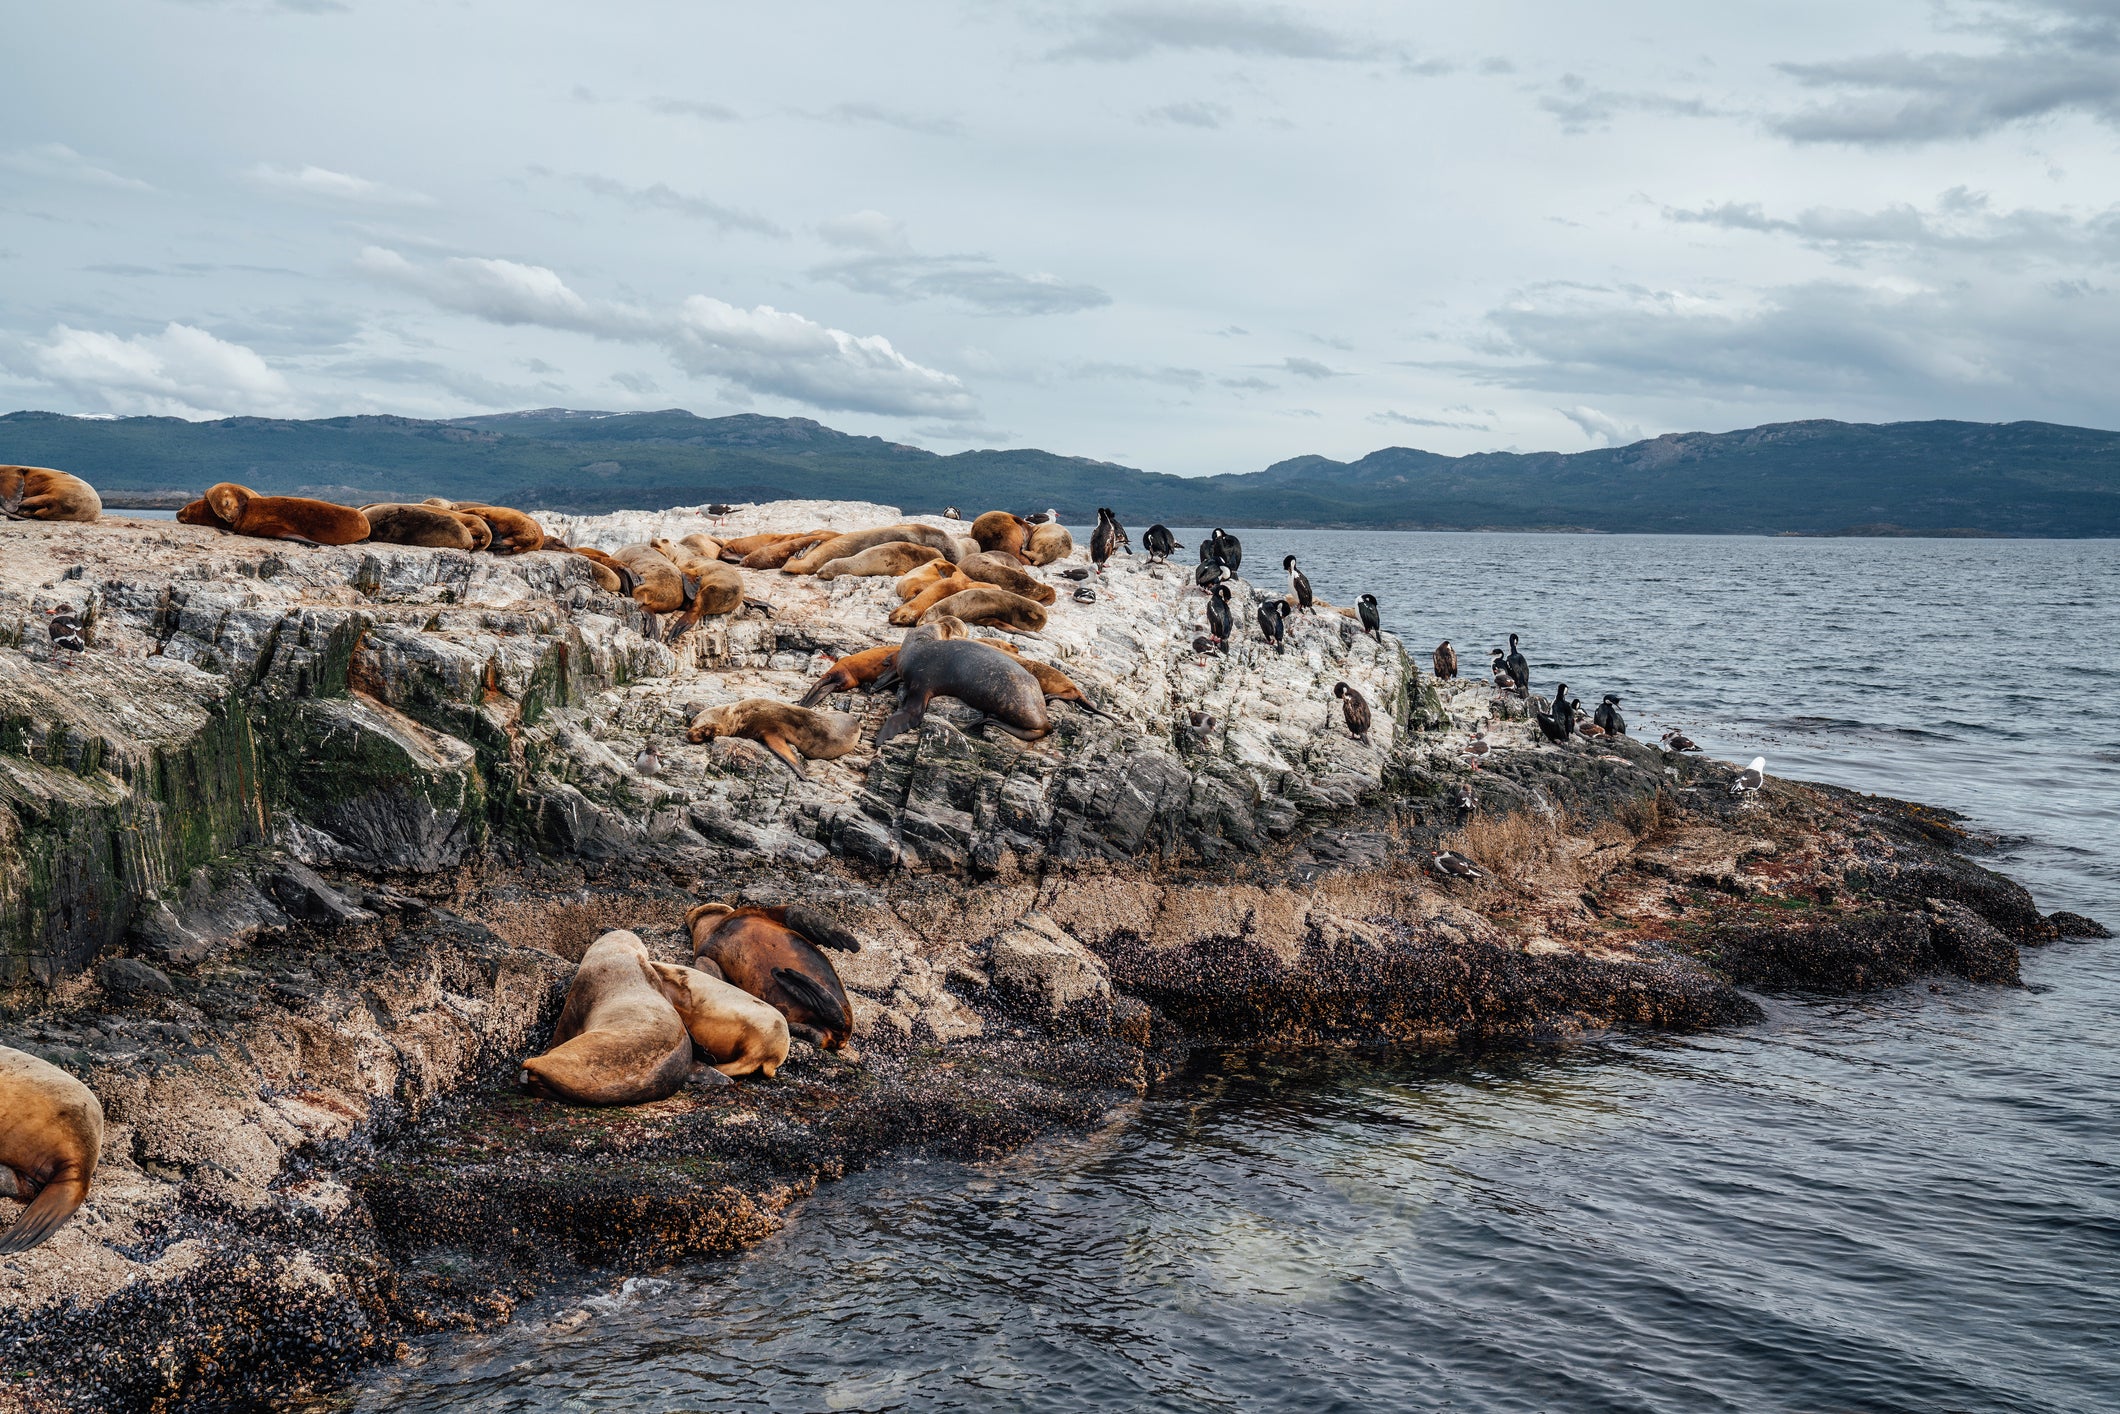 sea lions nap on rocks by ocean with cormorants nearby in Argentina